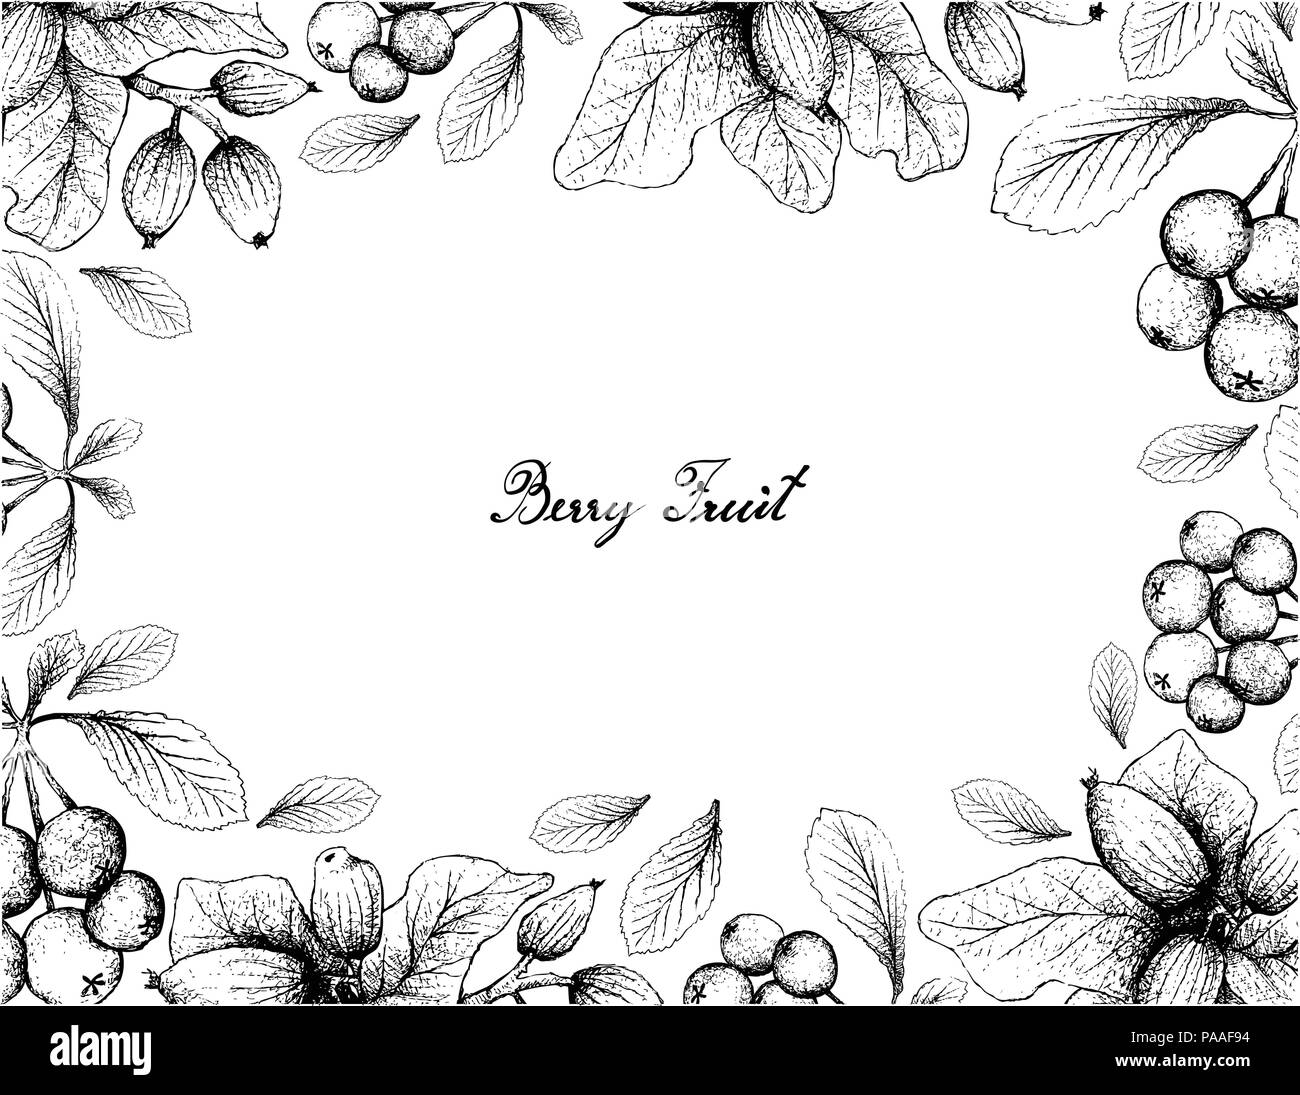 Berry Fruit, Illustration Frame of Hand Drawn Sketch of Firethorn Berries or Pyracantha and Peumo, Chilean Acorn or Cryptocarya Alba Fruits Isolated o Stock Vector